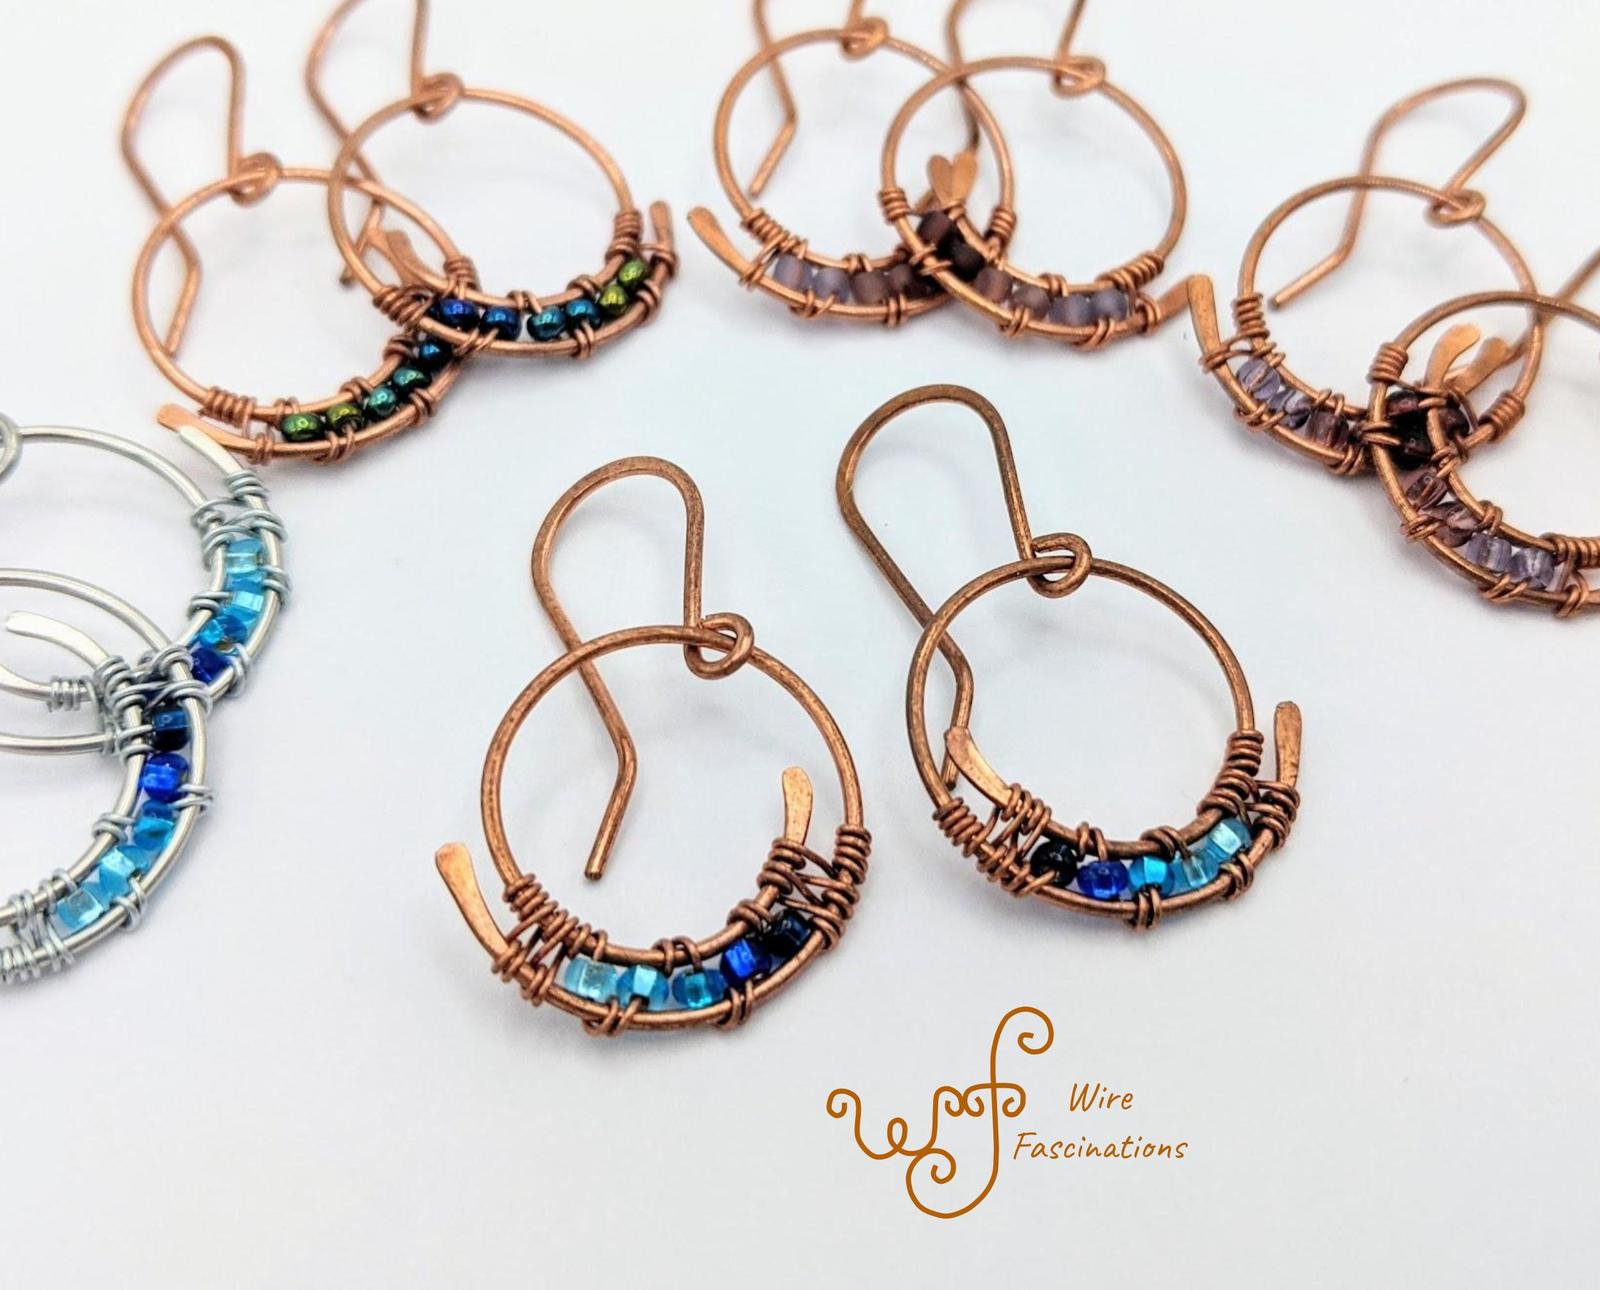 Handmade copper earrings: small spiral hoops wire wrapped with glass beads - $27.00